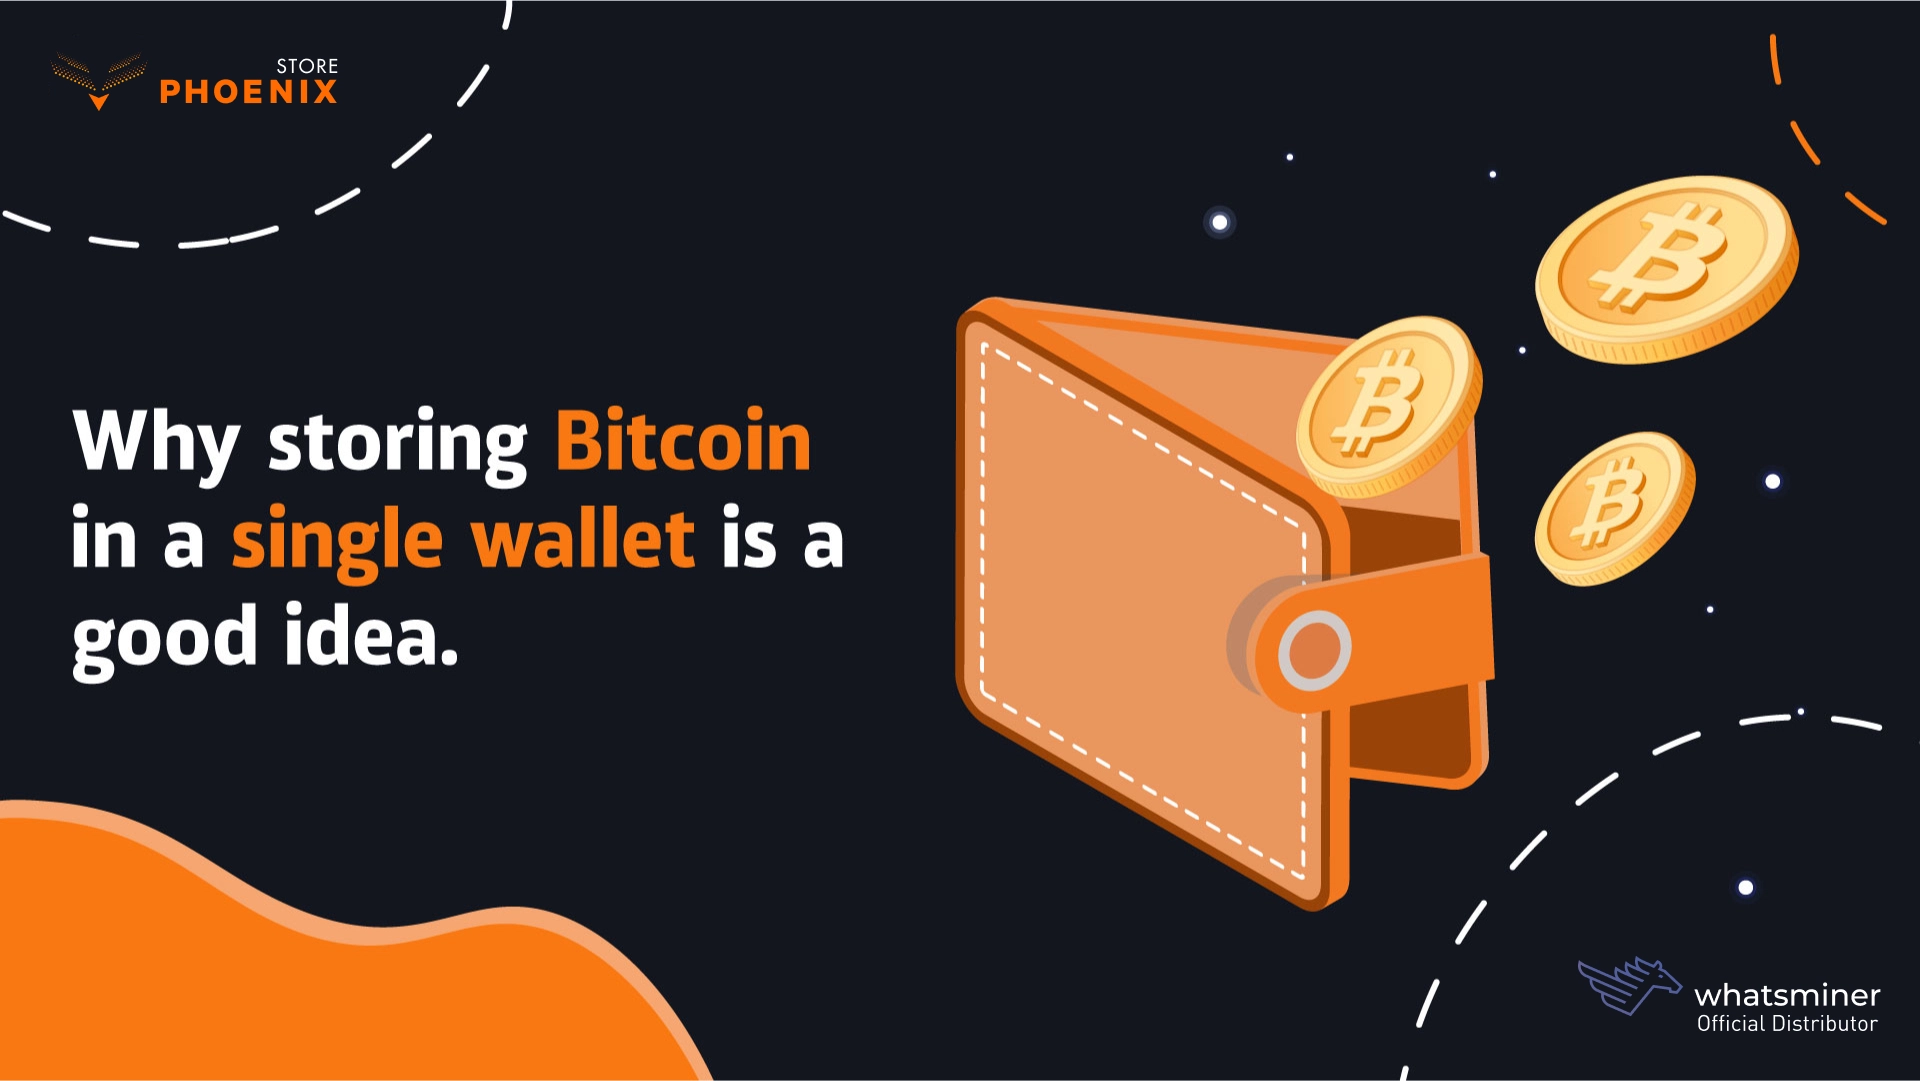 Why storing Bitcoin in a single wallet is a good idea?